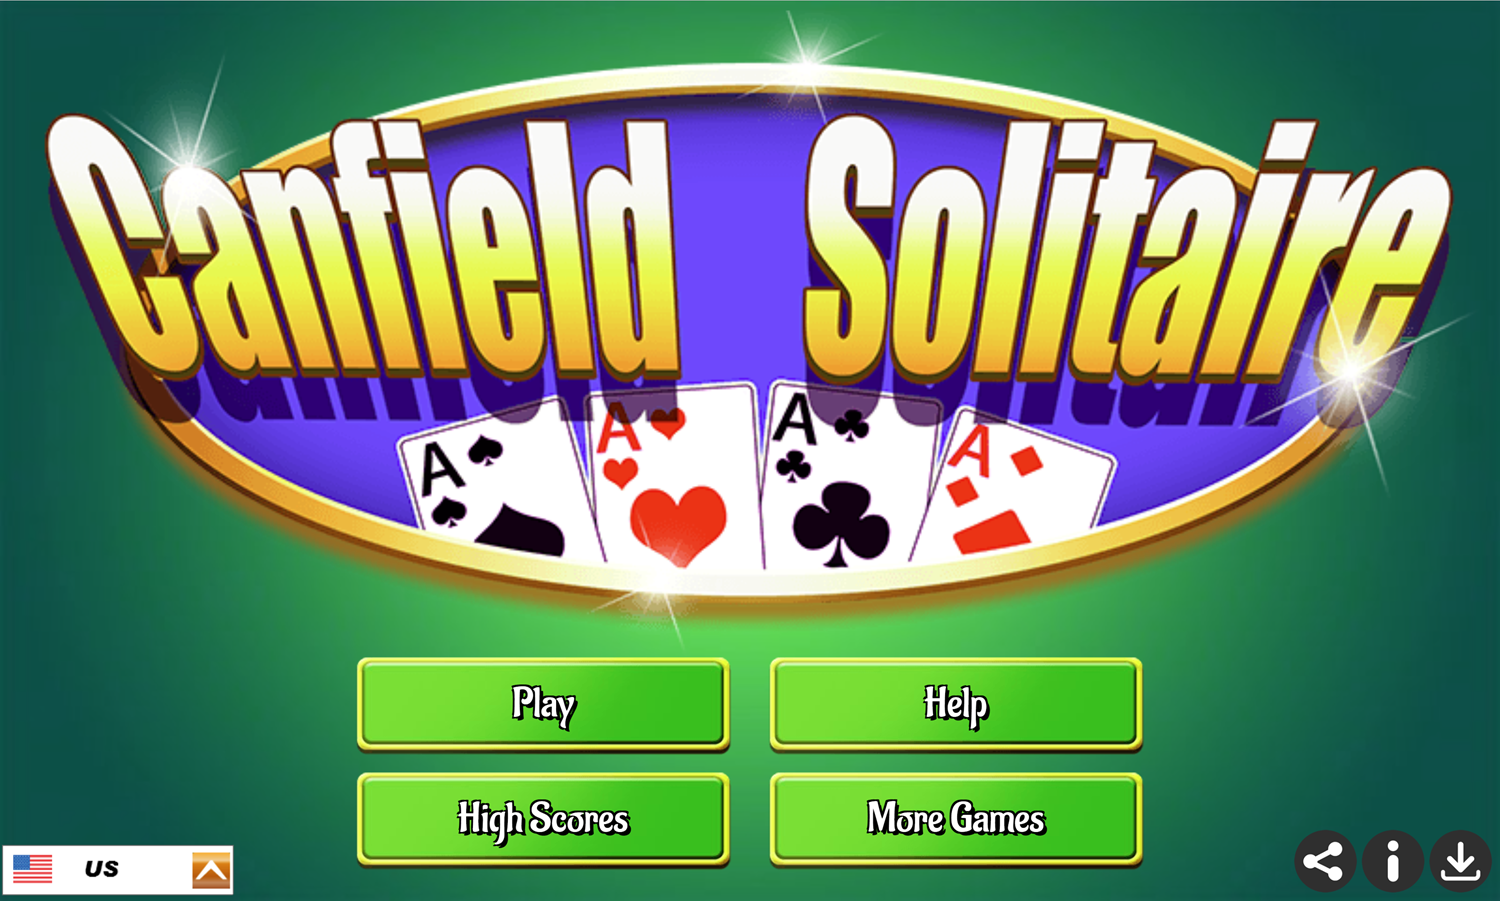 Canfield Solitaire Game Welcome Screen Screenshot.